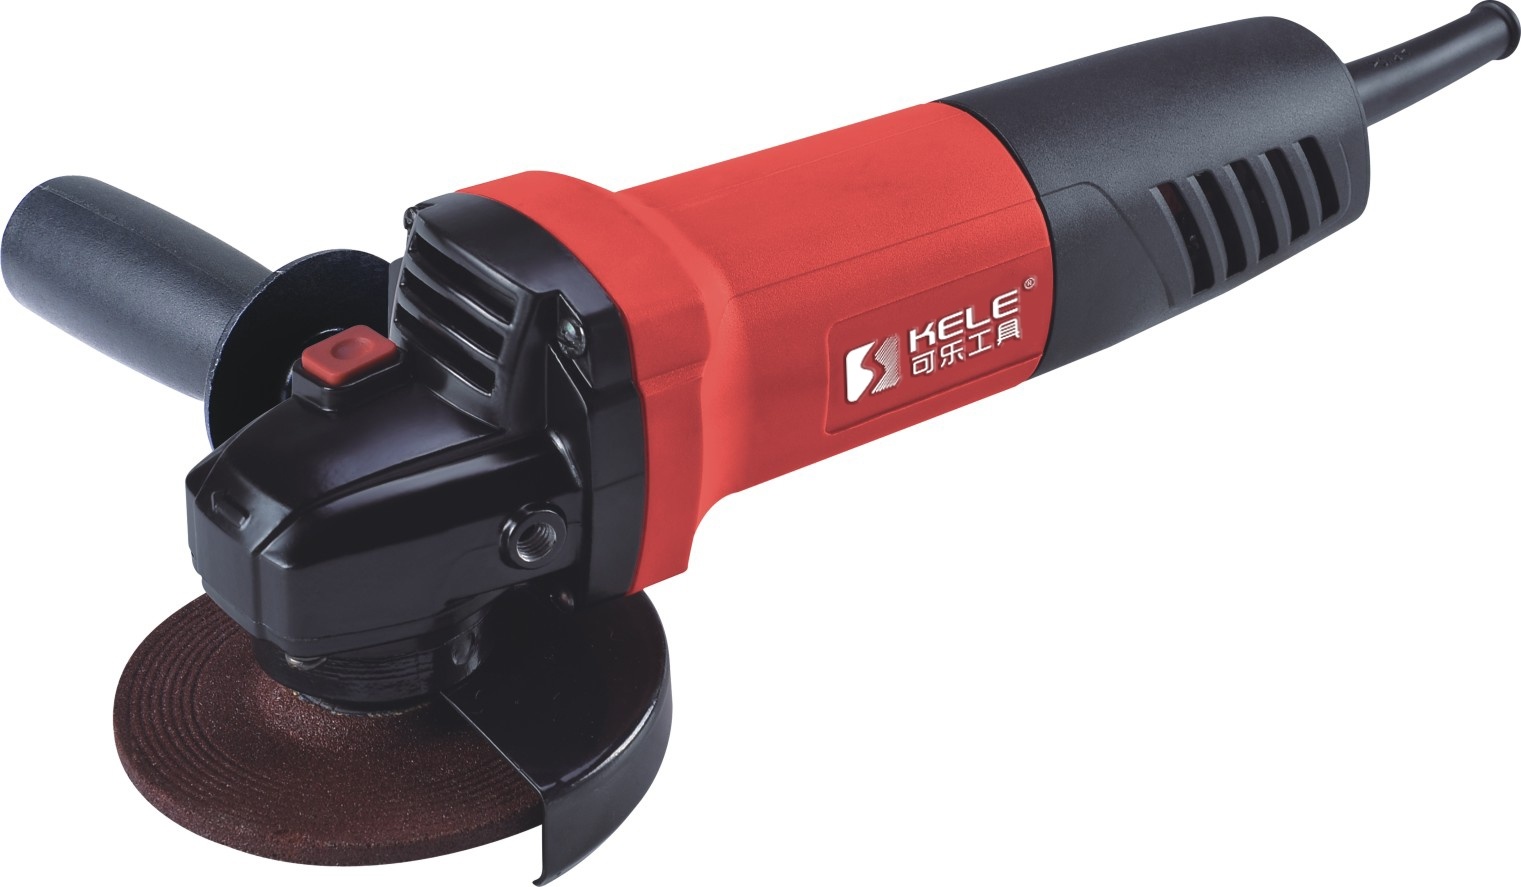 Industrial Power Tool (Angle Grinder, Disc Size 110mm/115mm, Power 750W)